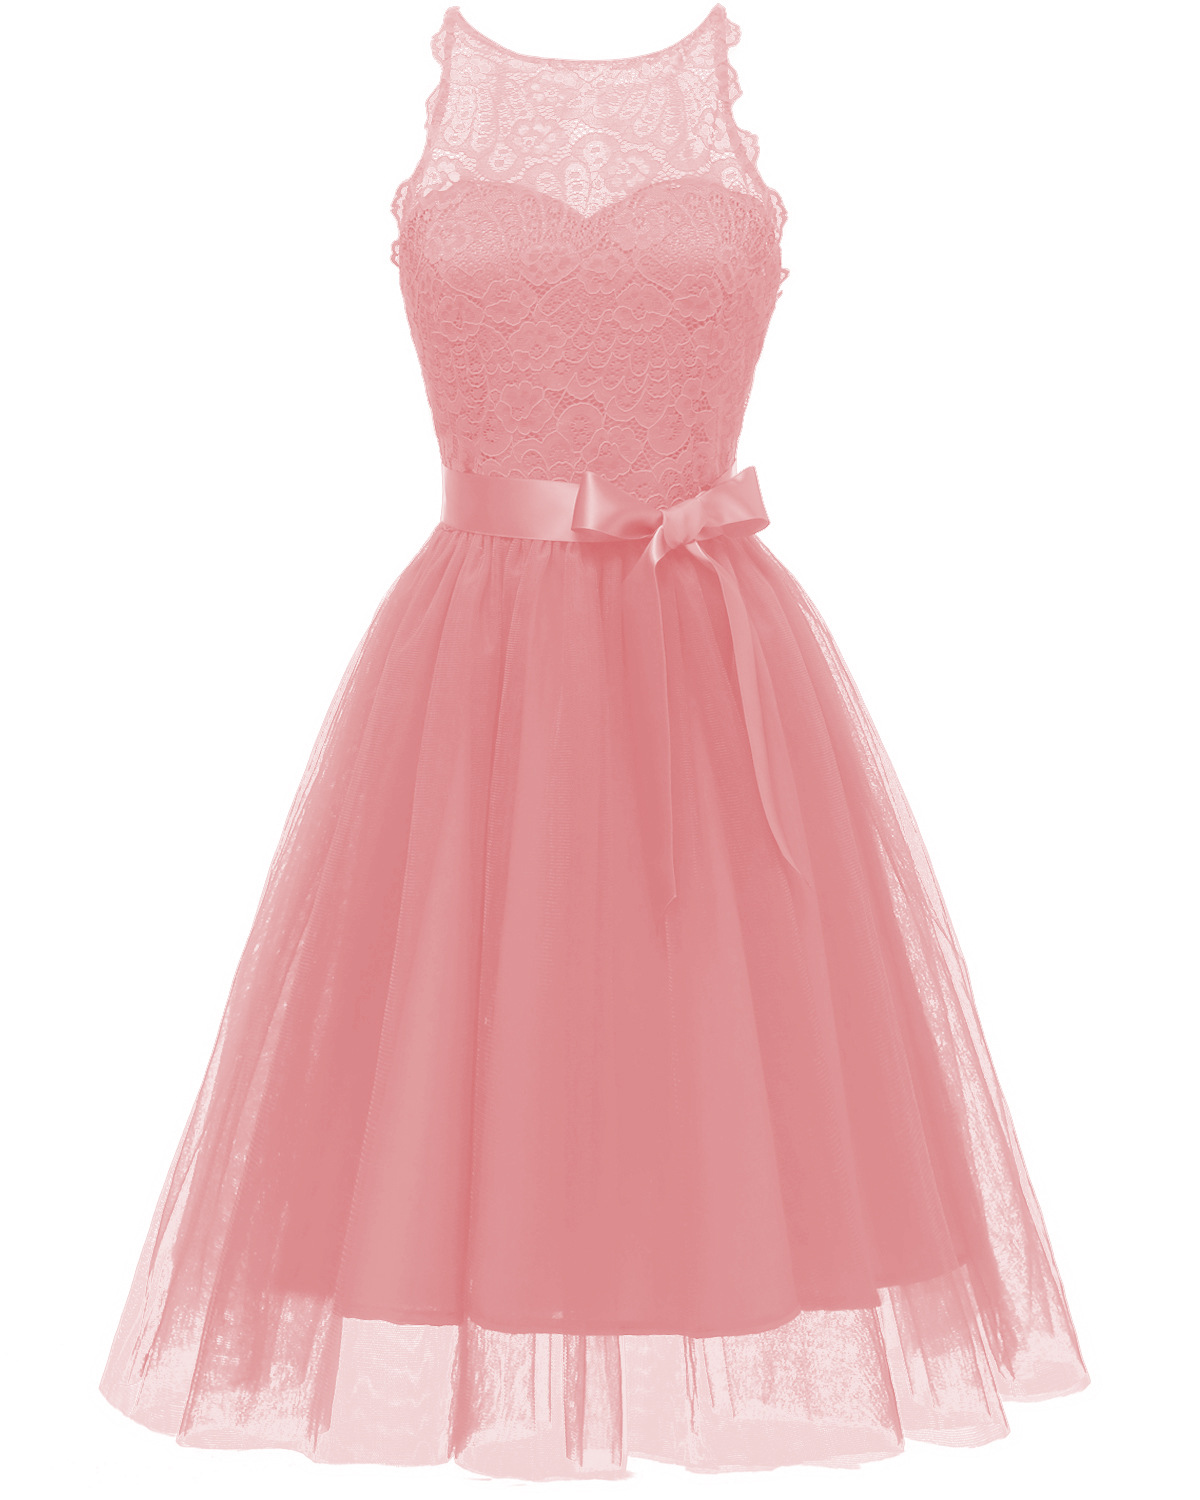 Princess Style A Line Halter Neck Sleeveless Hollow Lace Floral Bridesmaid Wedding Dress - Pink